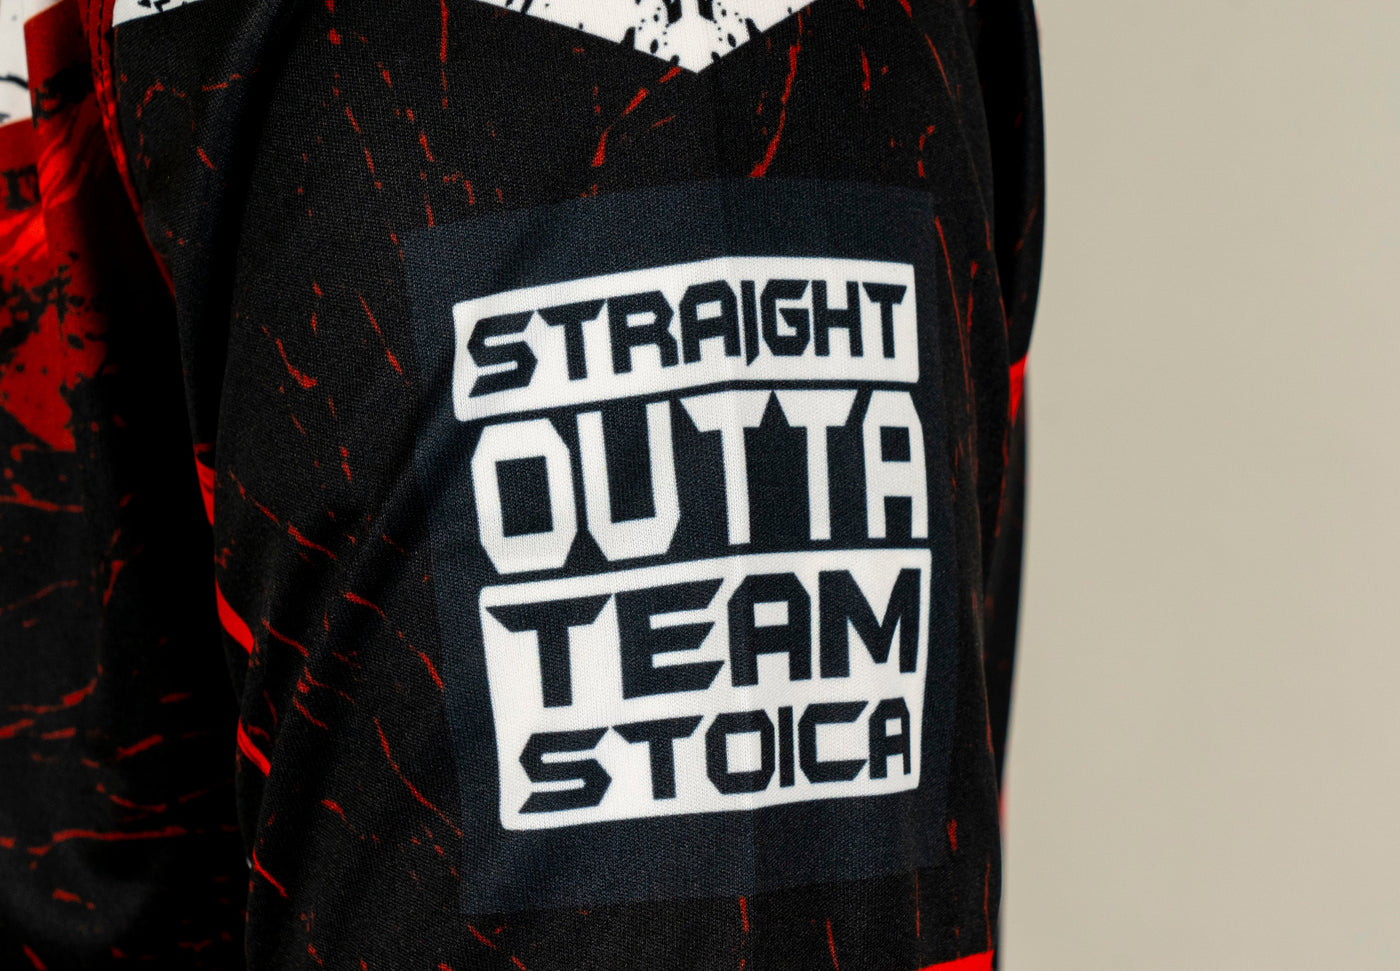 Tricou Knockout Stoica | knock-out.ro